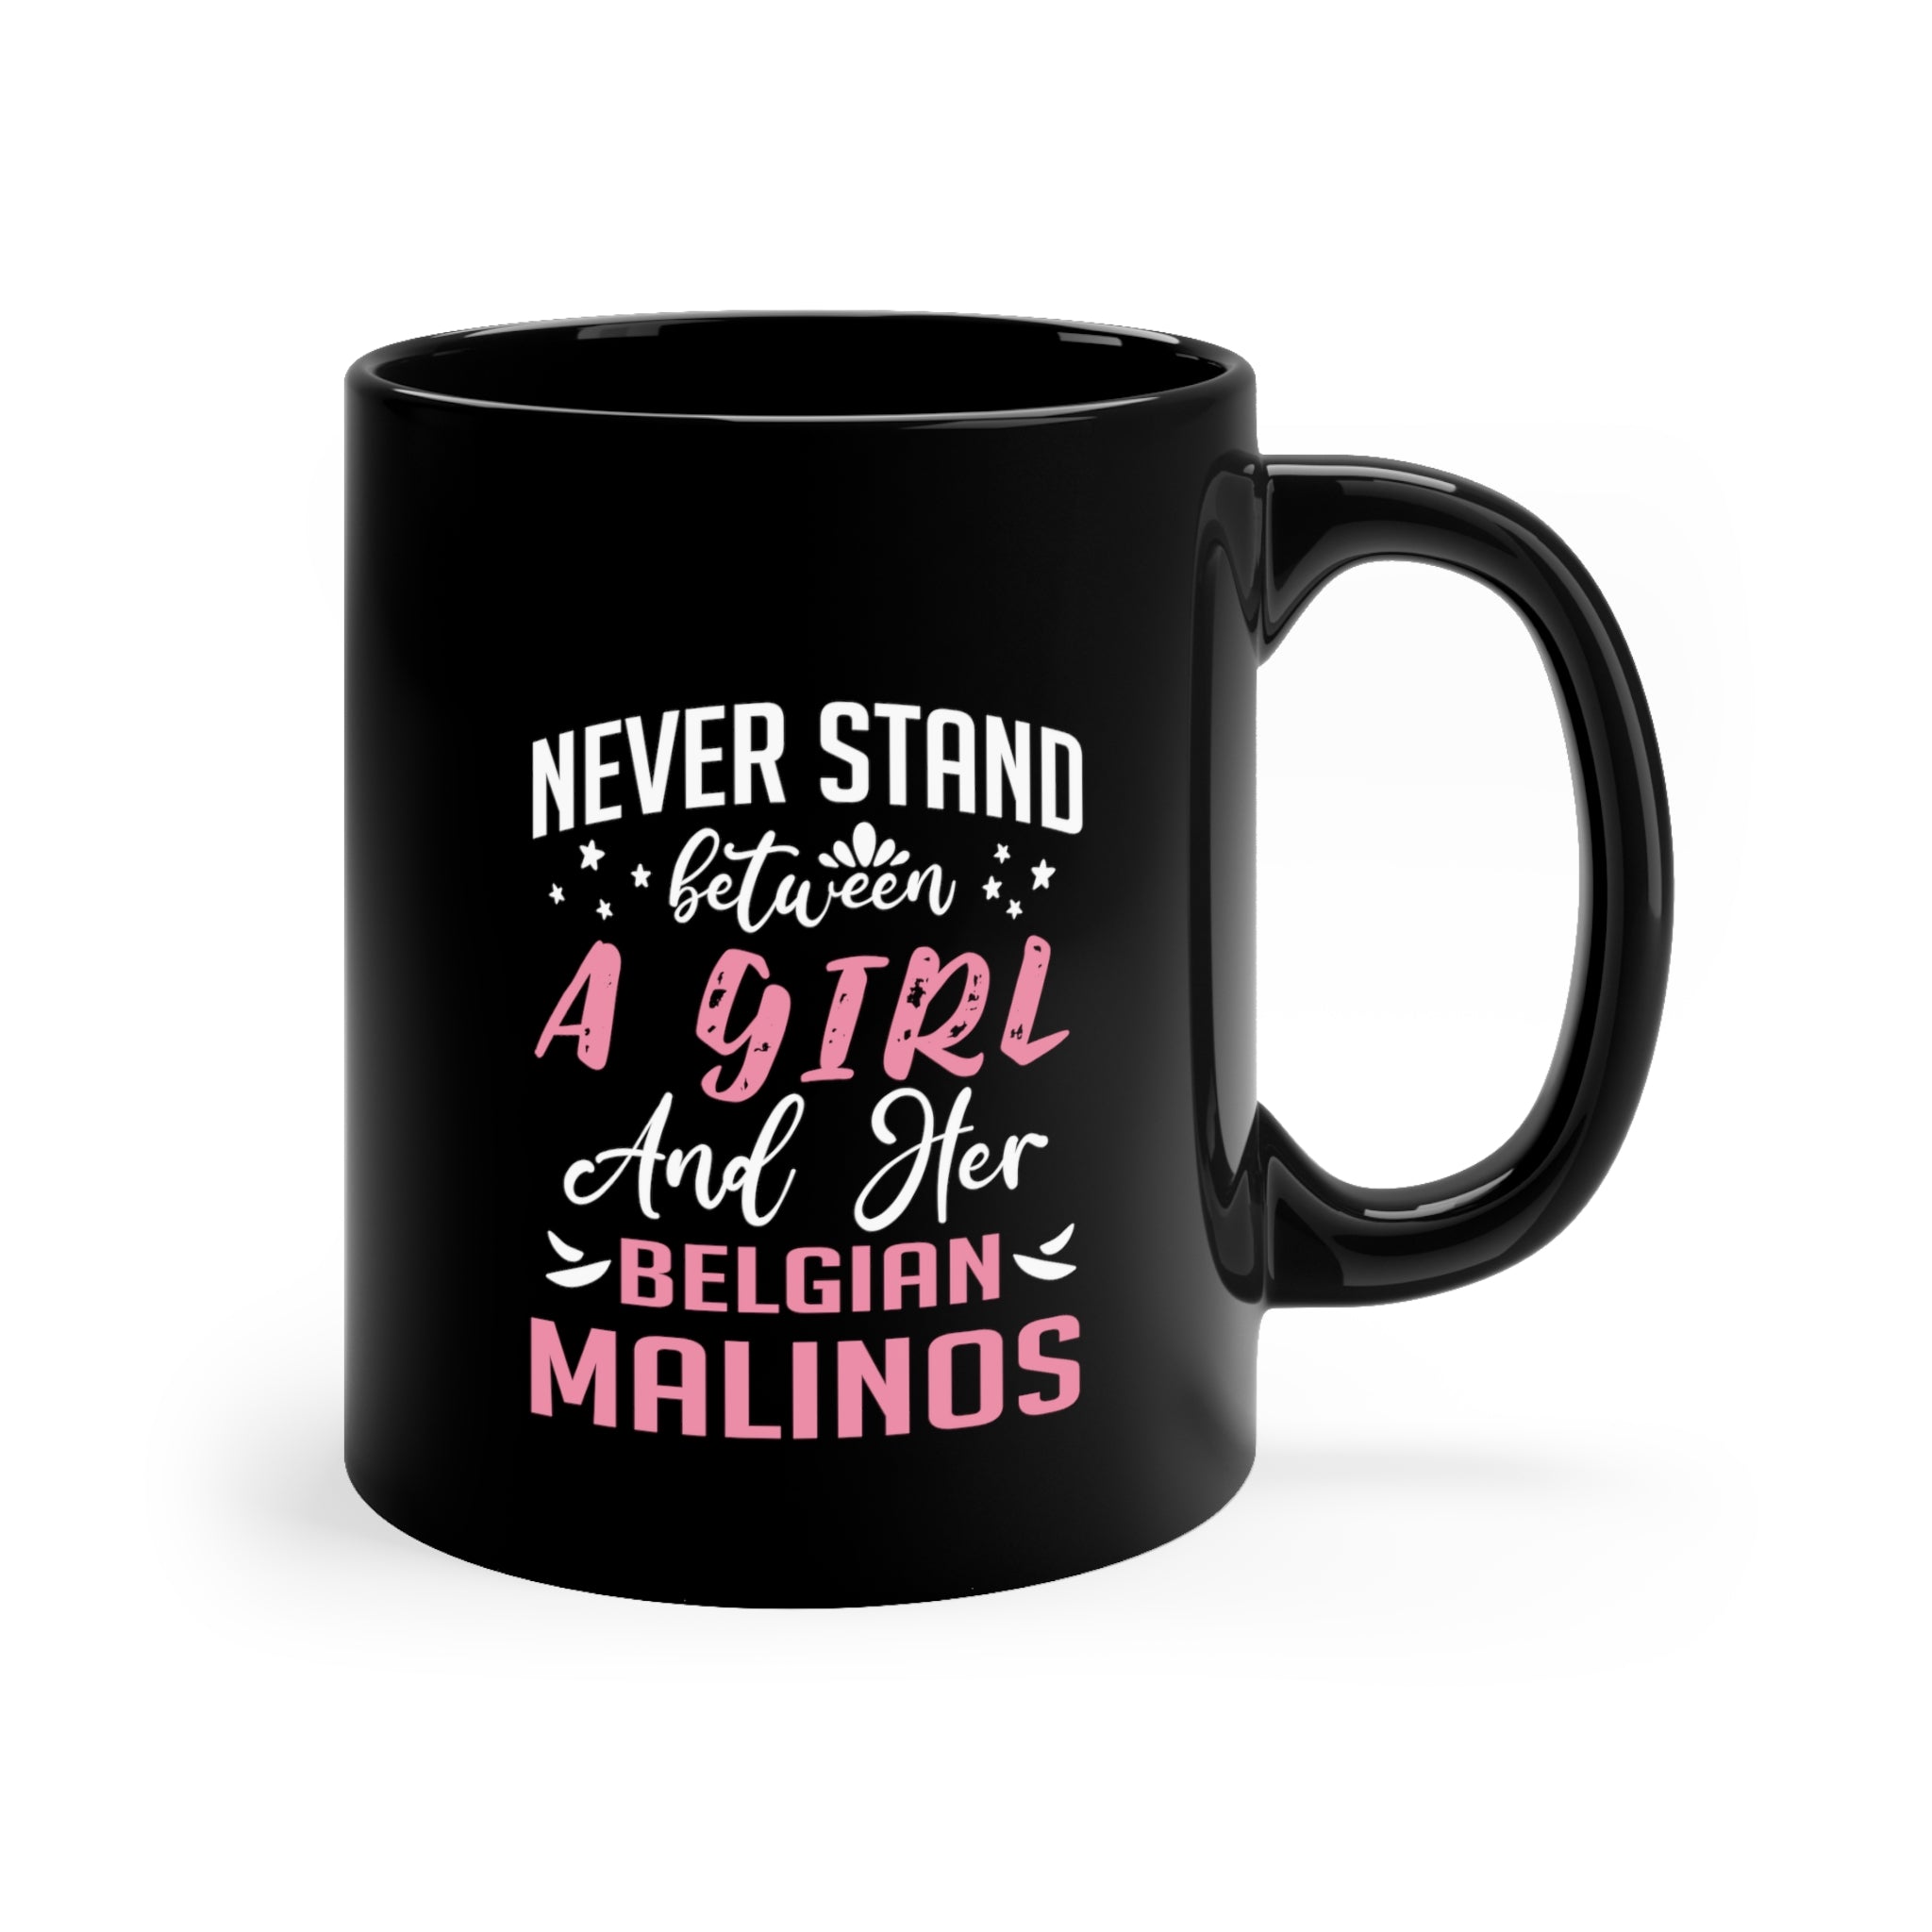 Never Stand Between a Girl and Her Malinois 11oz Black Ceramic Mug - Dog Lover Coffee Cup